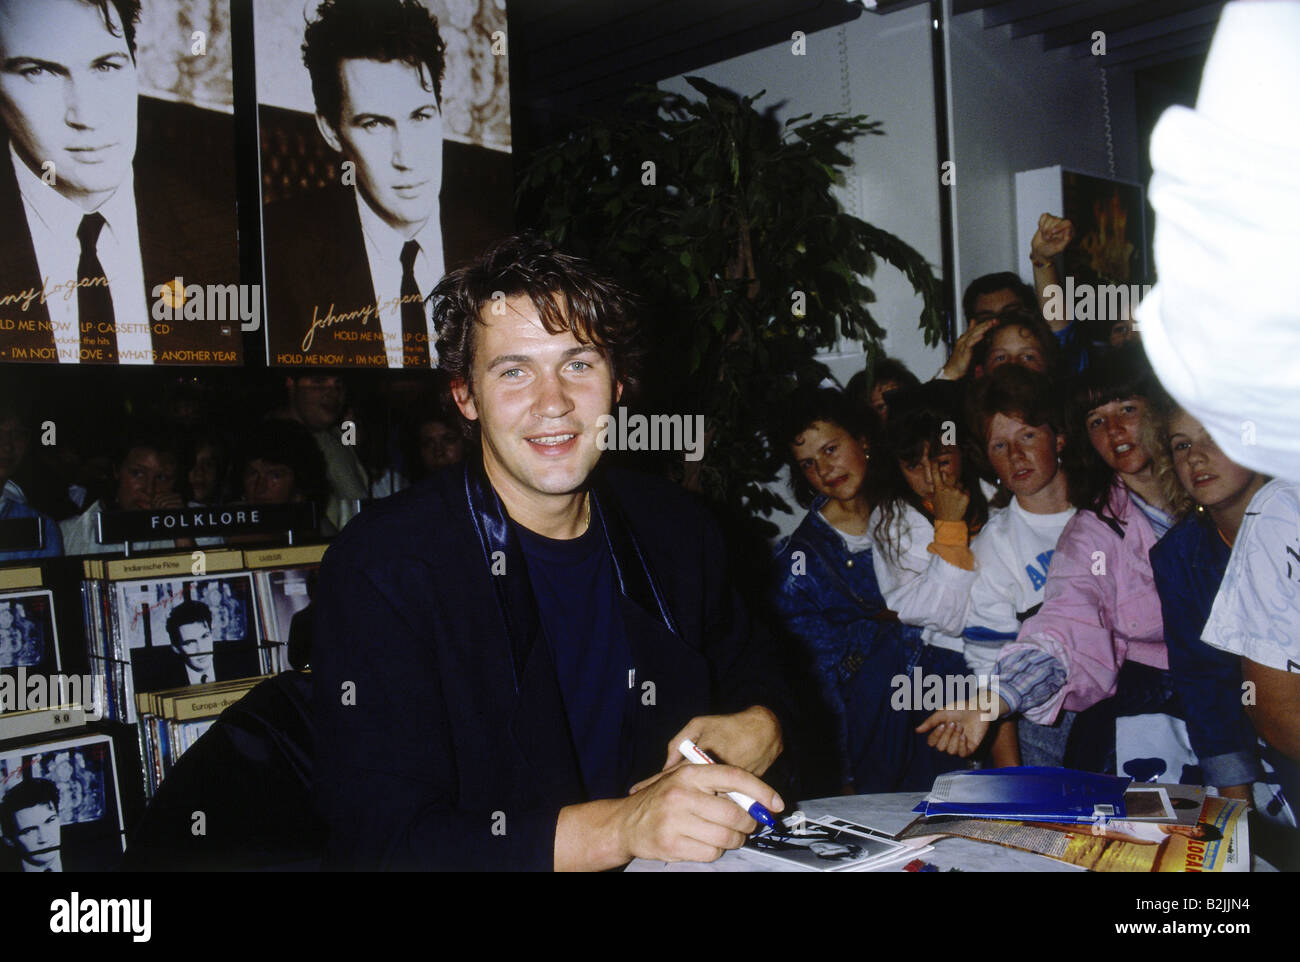 Logan Johnny, * 13.5.1954, Irish singer and composer, half length, autographing session, shopping centre Karstadt Oberpollinger, Munich, 1987, Stock Photo